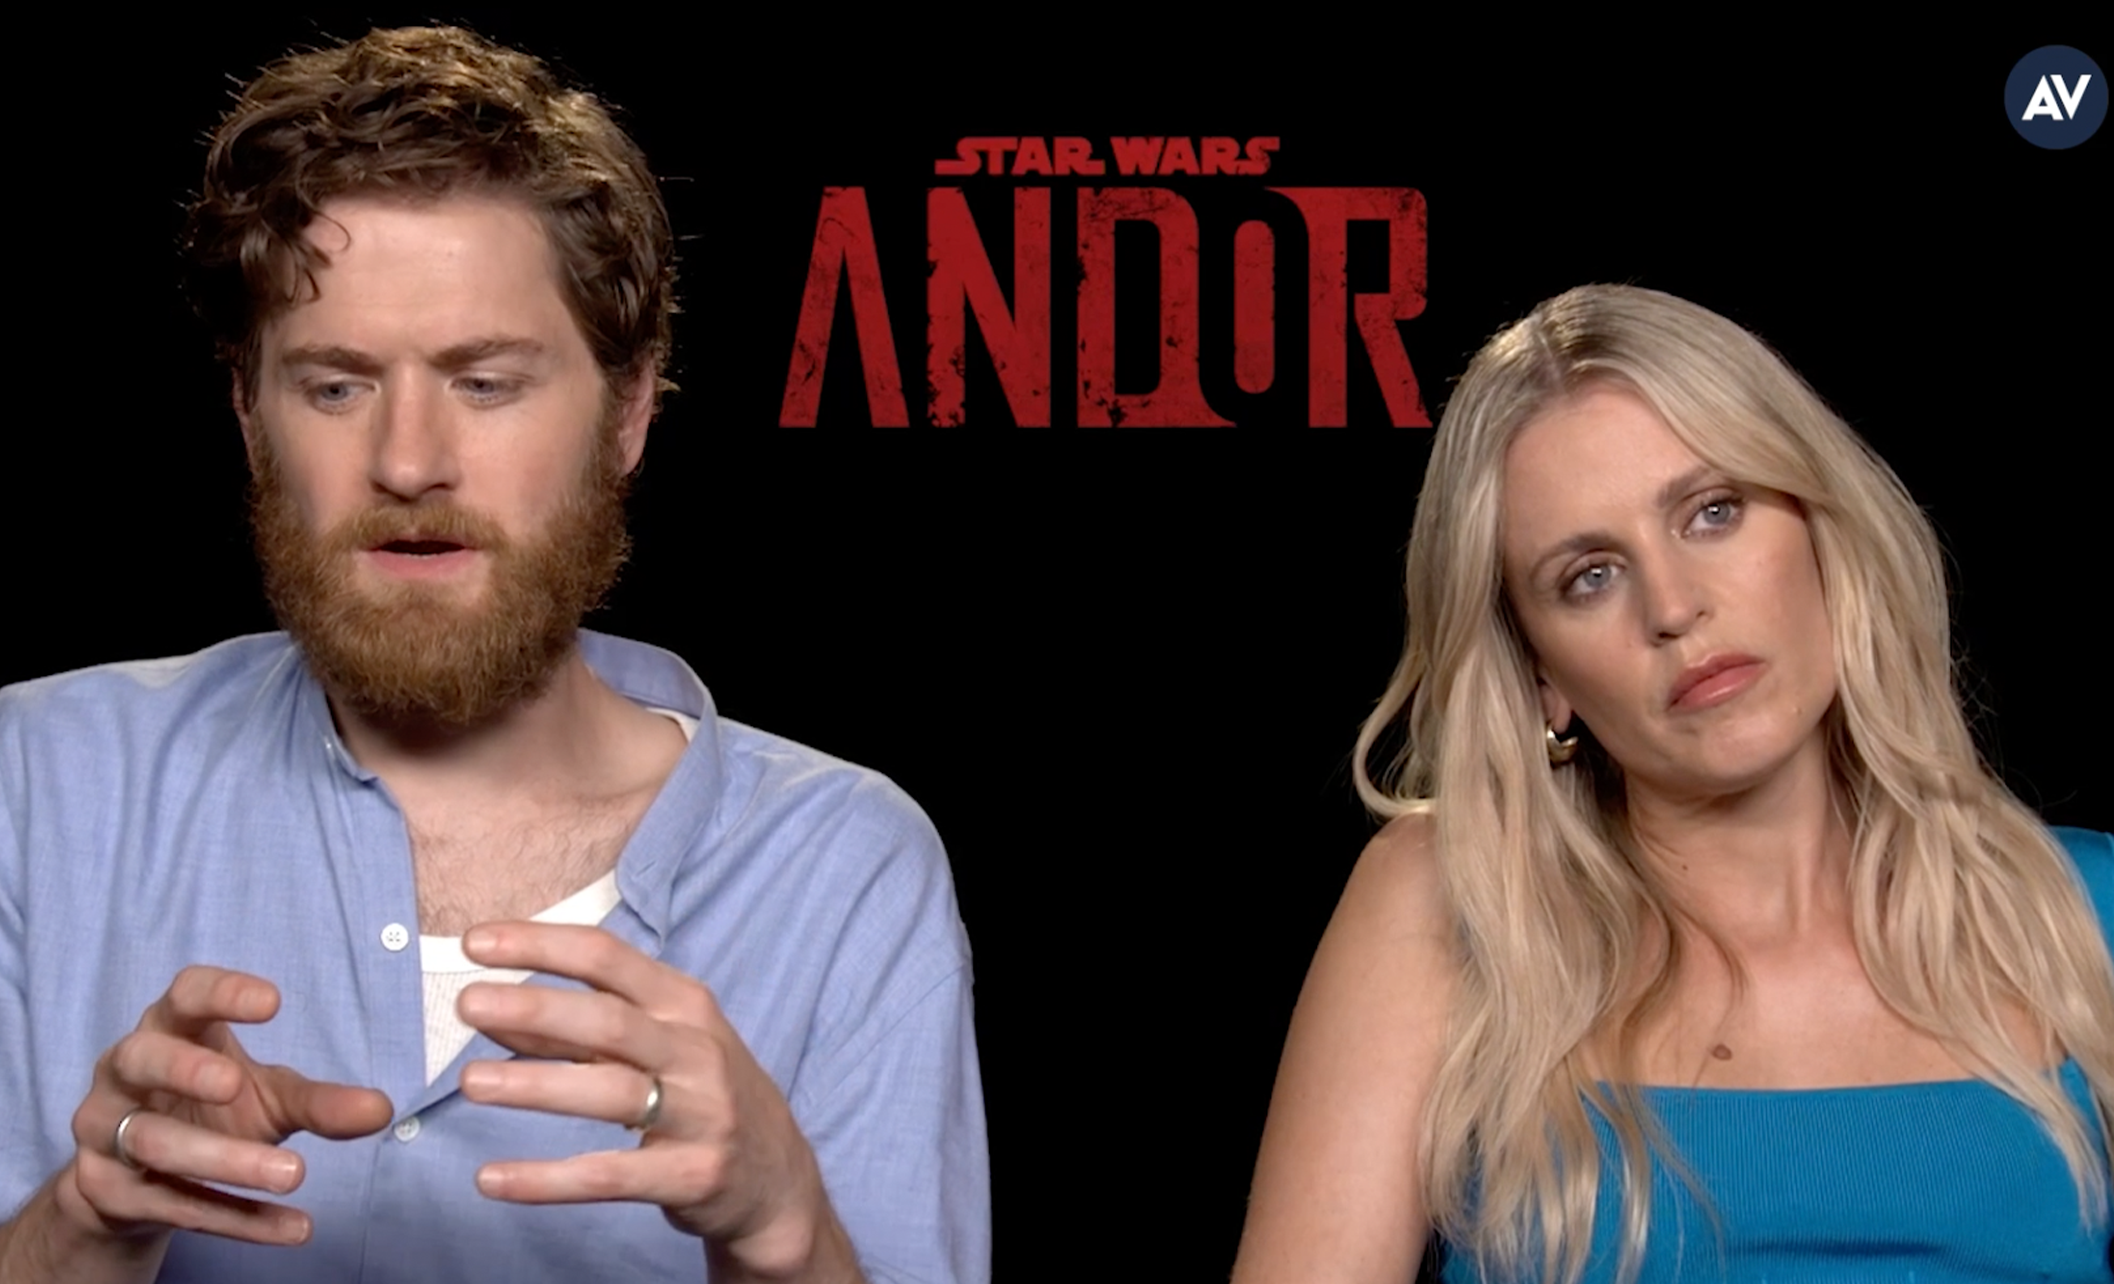 Andor stars Adria Arjona, Kyle Soller and Denise Gough on joining the Star Wars universe